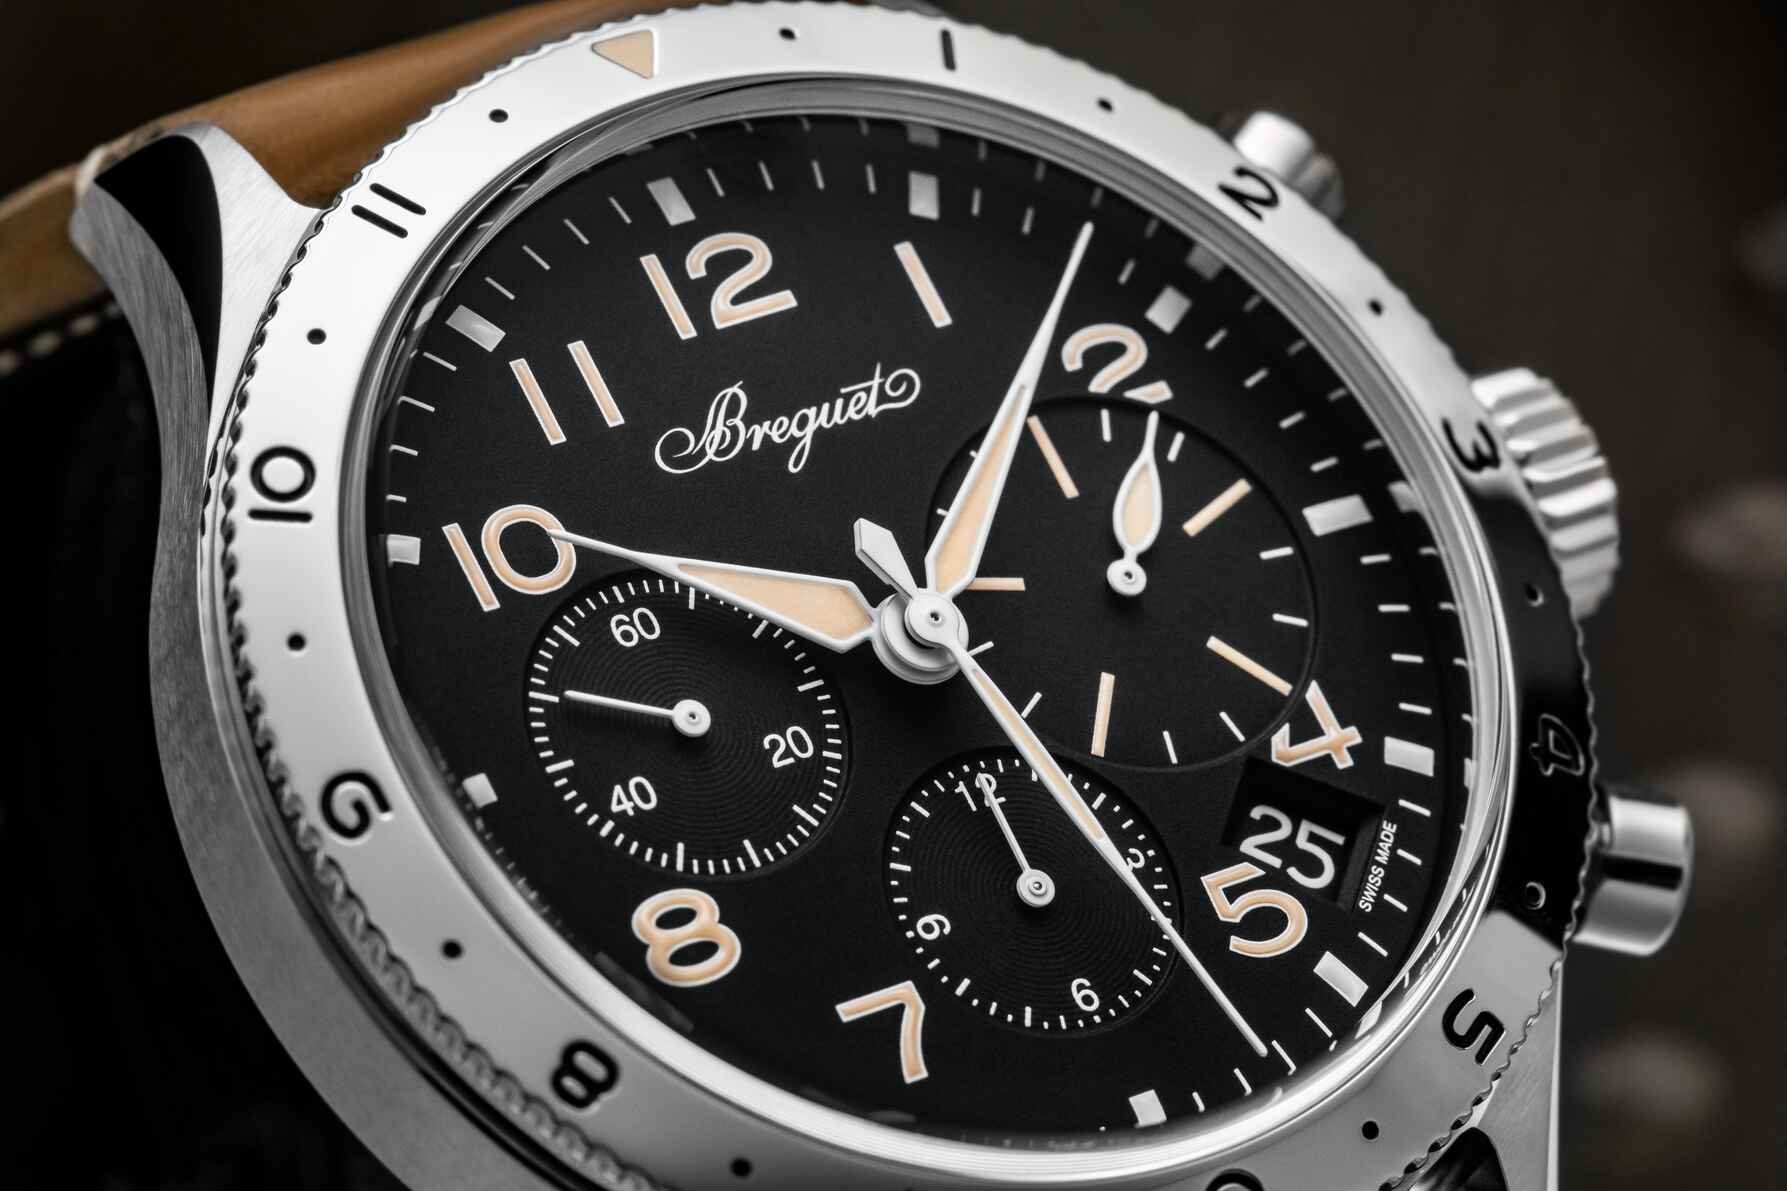 “Breguet holds a special place in people's hearts”